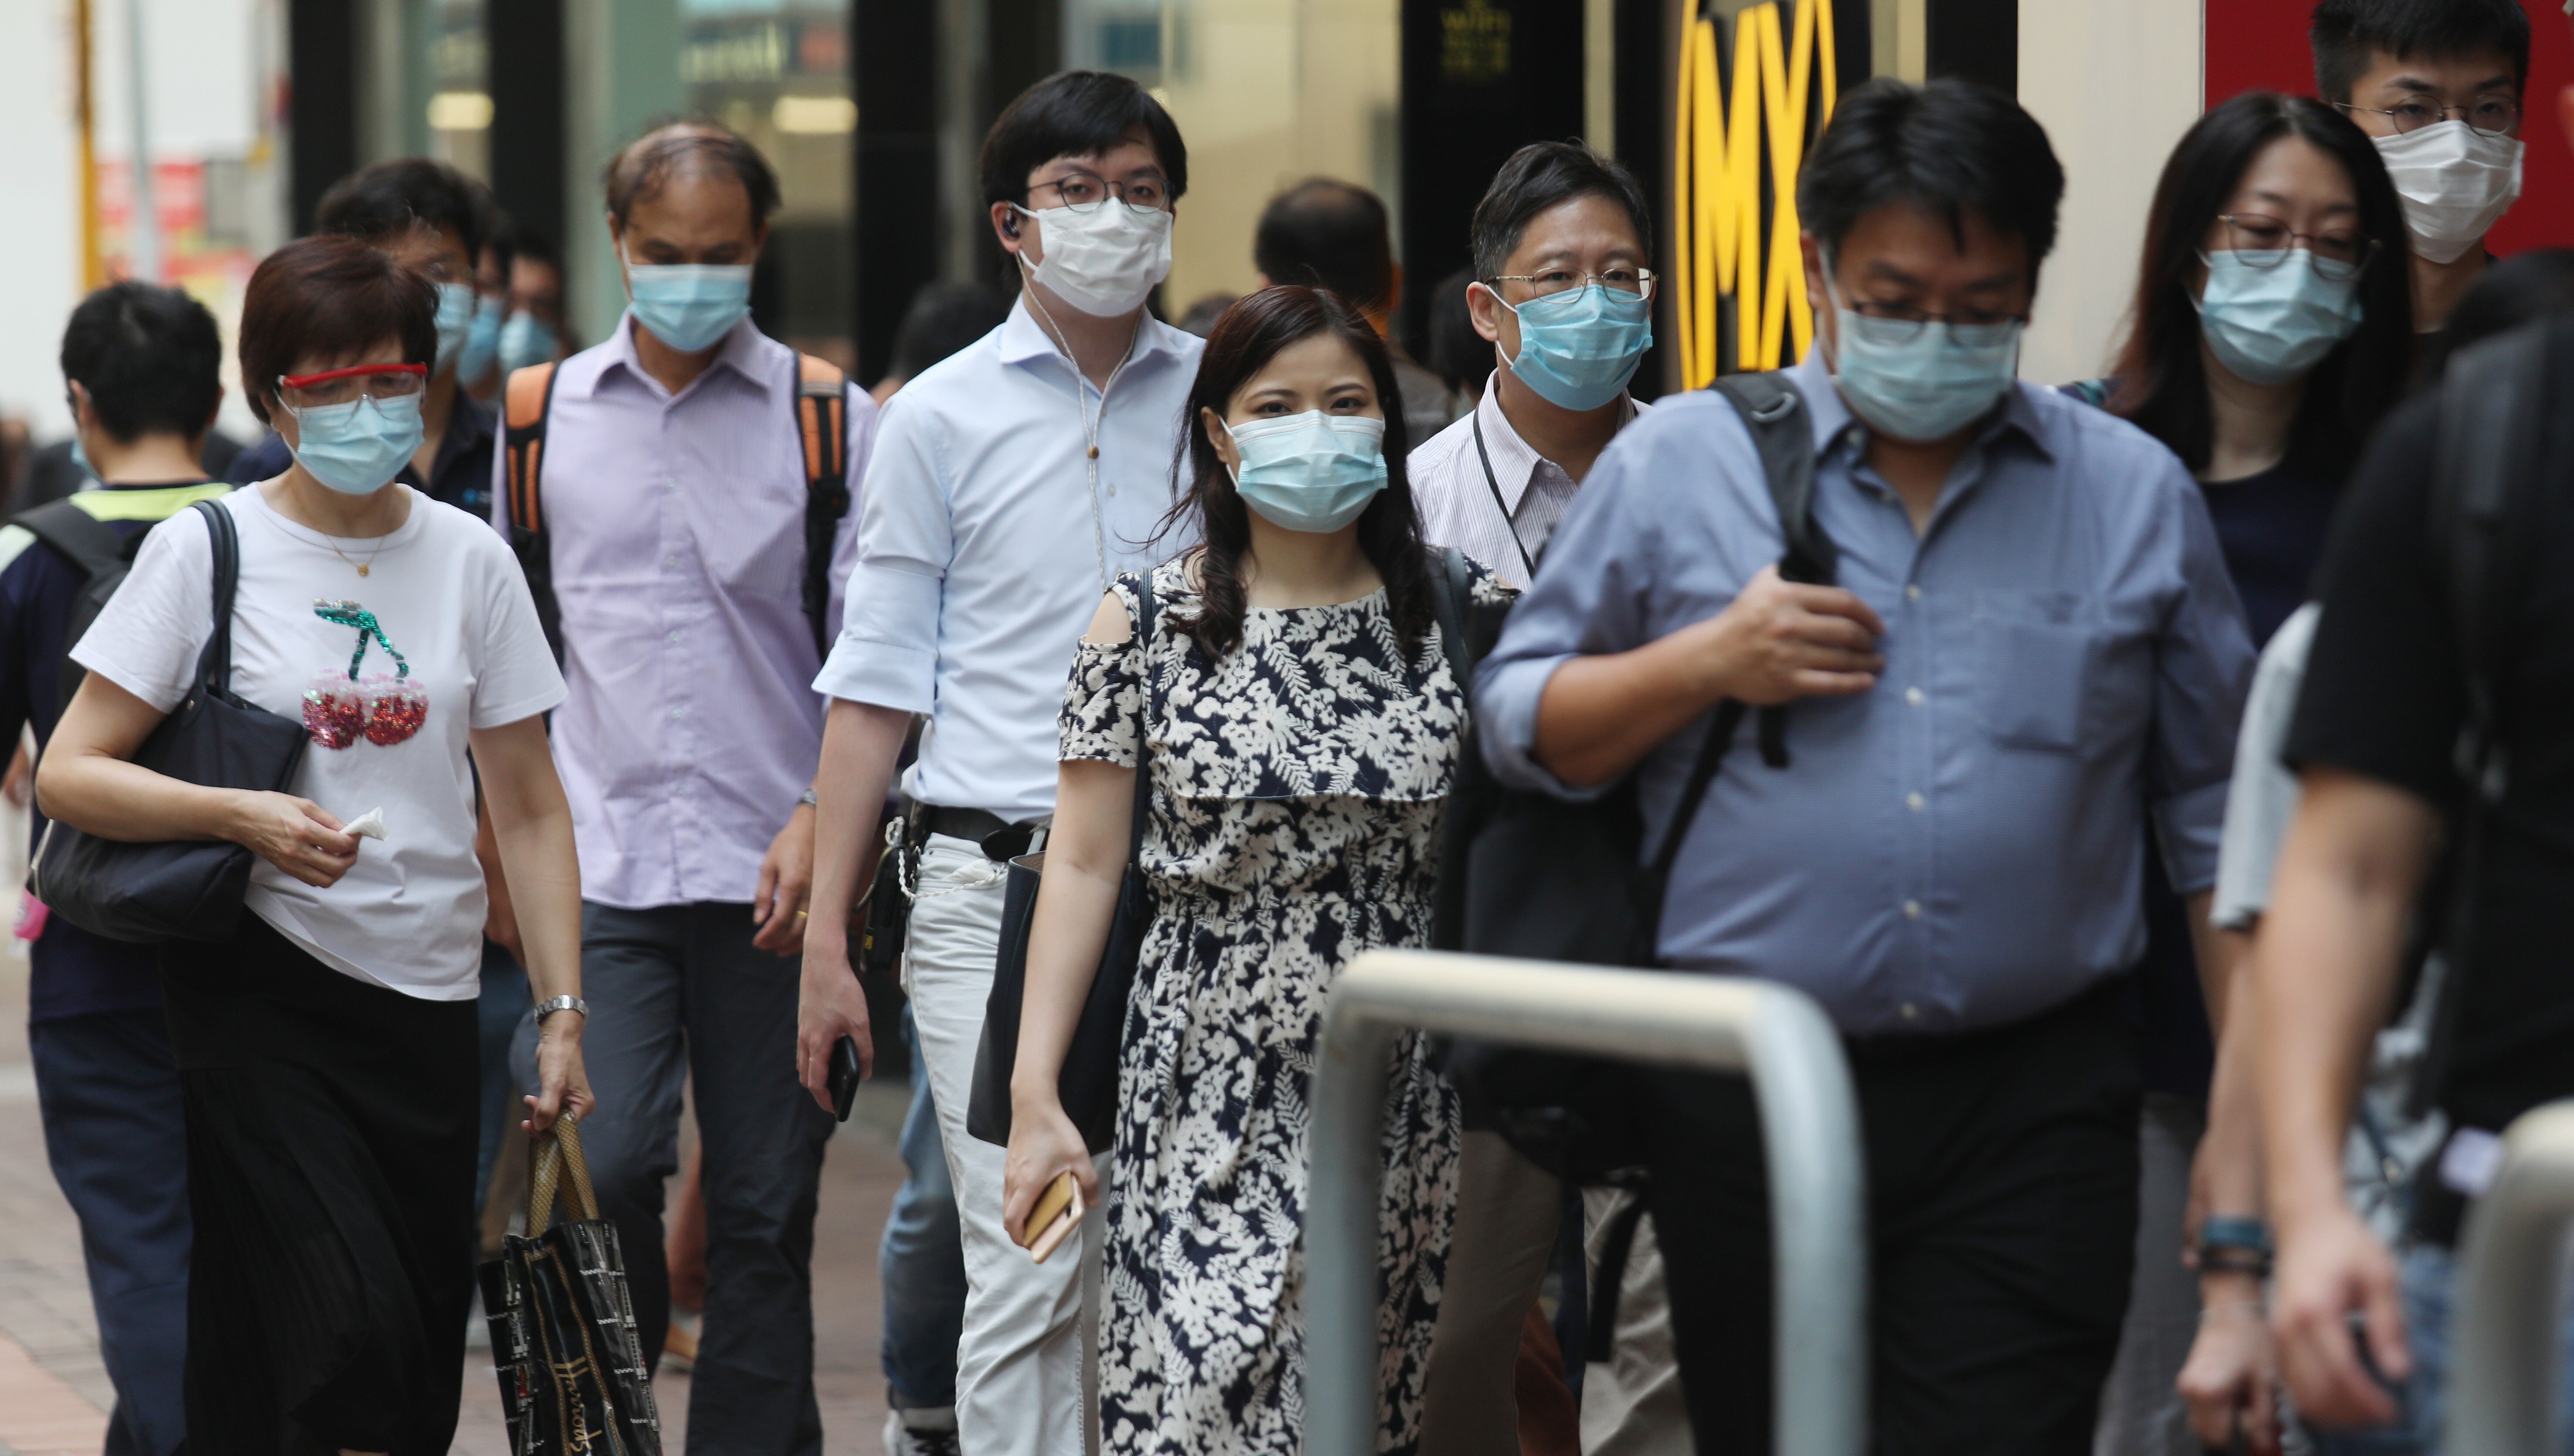 Health authorities cannot rule out a bigger outbreak in the community. Photo: Xiaomei Chen